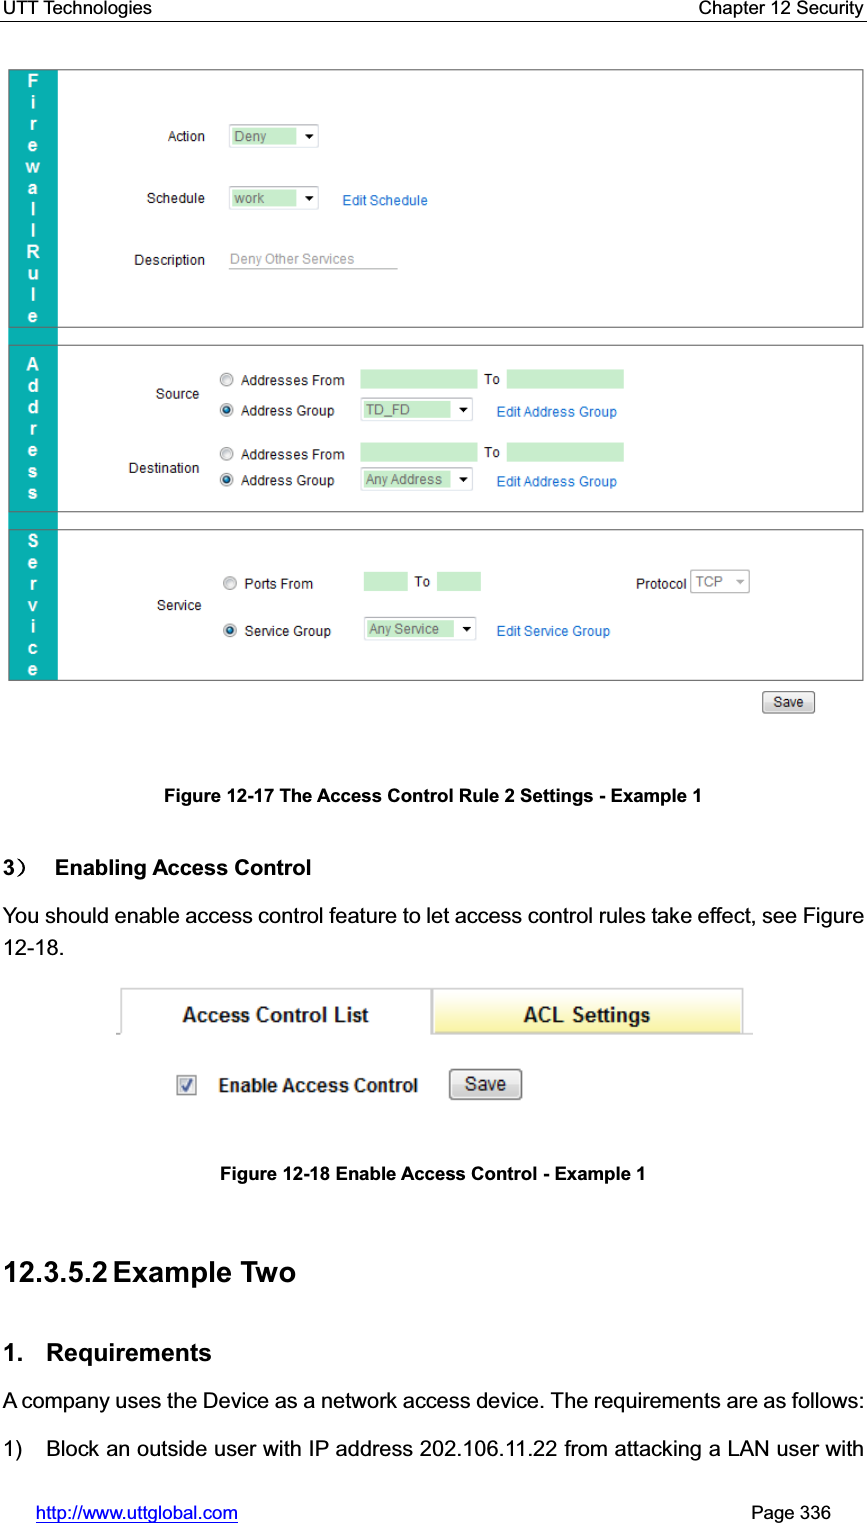 UTT Technologies    Chapter 12 Security   http://www.uttglobal.com                                                       Page 336 Figure 12-17 The Access Control Rule 2 Settings - Example 13˅ Enabling Access Control You should enable access control feature to let access control rules take effect, see Figure 12-18.  Figure 12-18 Enable Access Control - Example 1 12.3.5.2 Example Two 1. Requirements A company uses the Device as a network access device. The requirements are as follows: 1)    Block an outside user with IP address 202.106.11.22 from attacking a LAN user with 